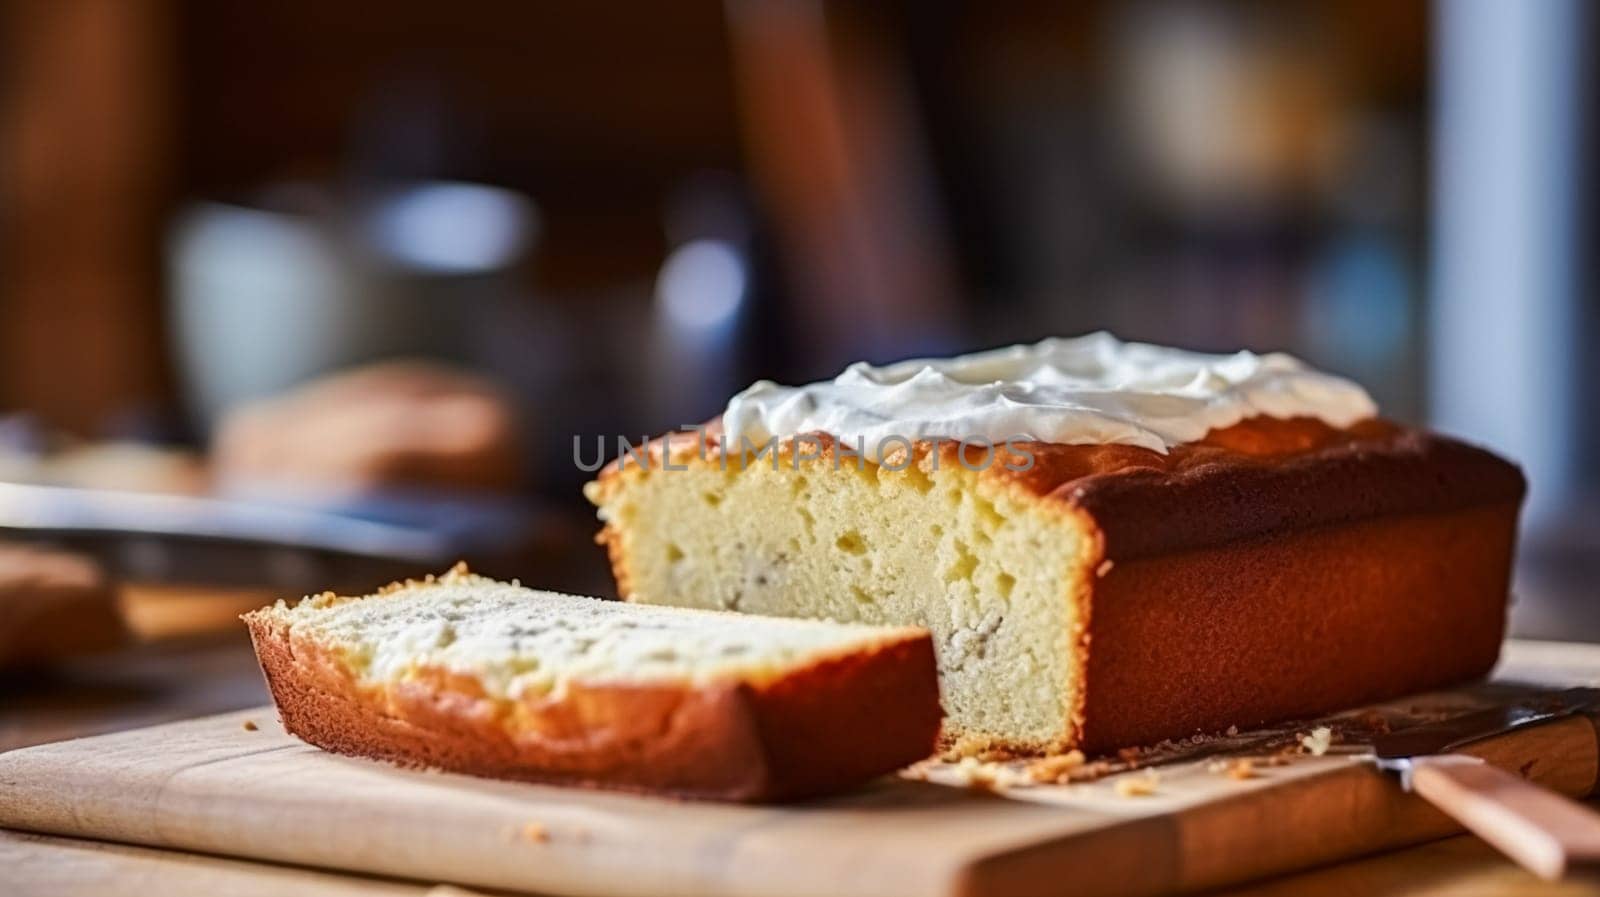 Banana bread in English country cottage, baking food and easy recipe idea for menu, food blog and cookbook inspiration